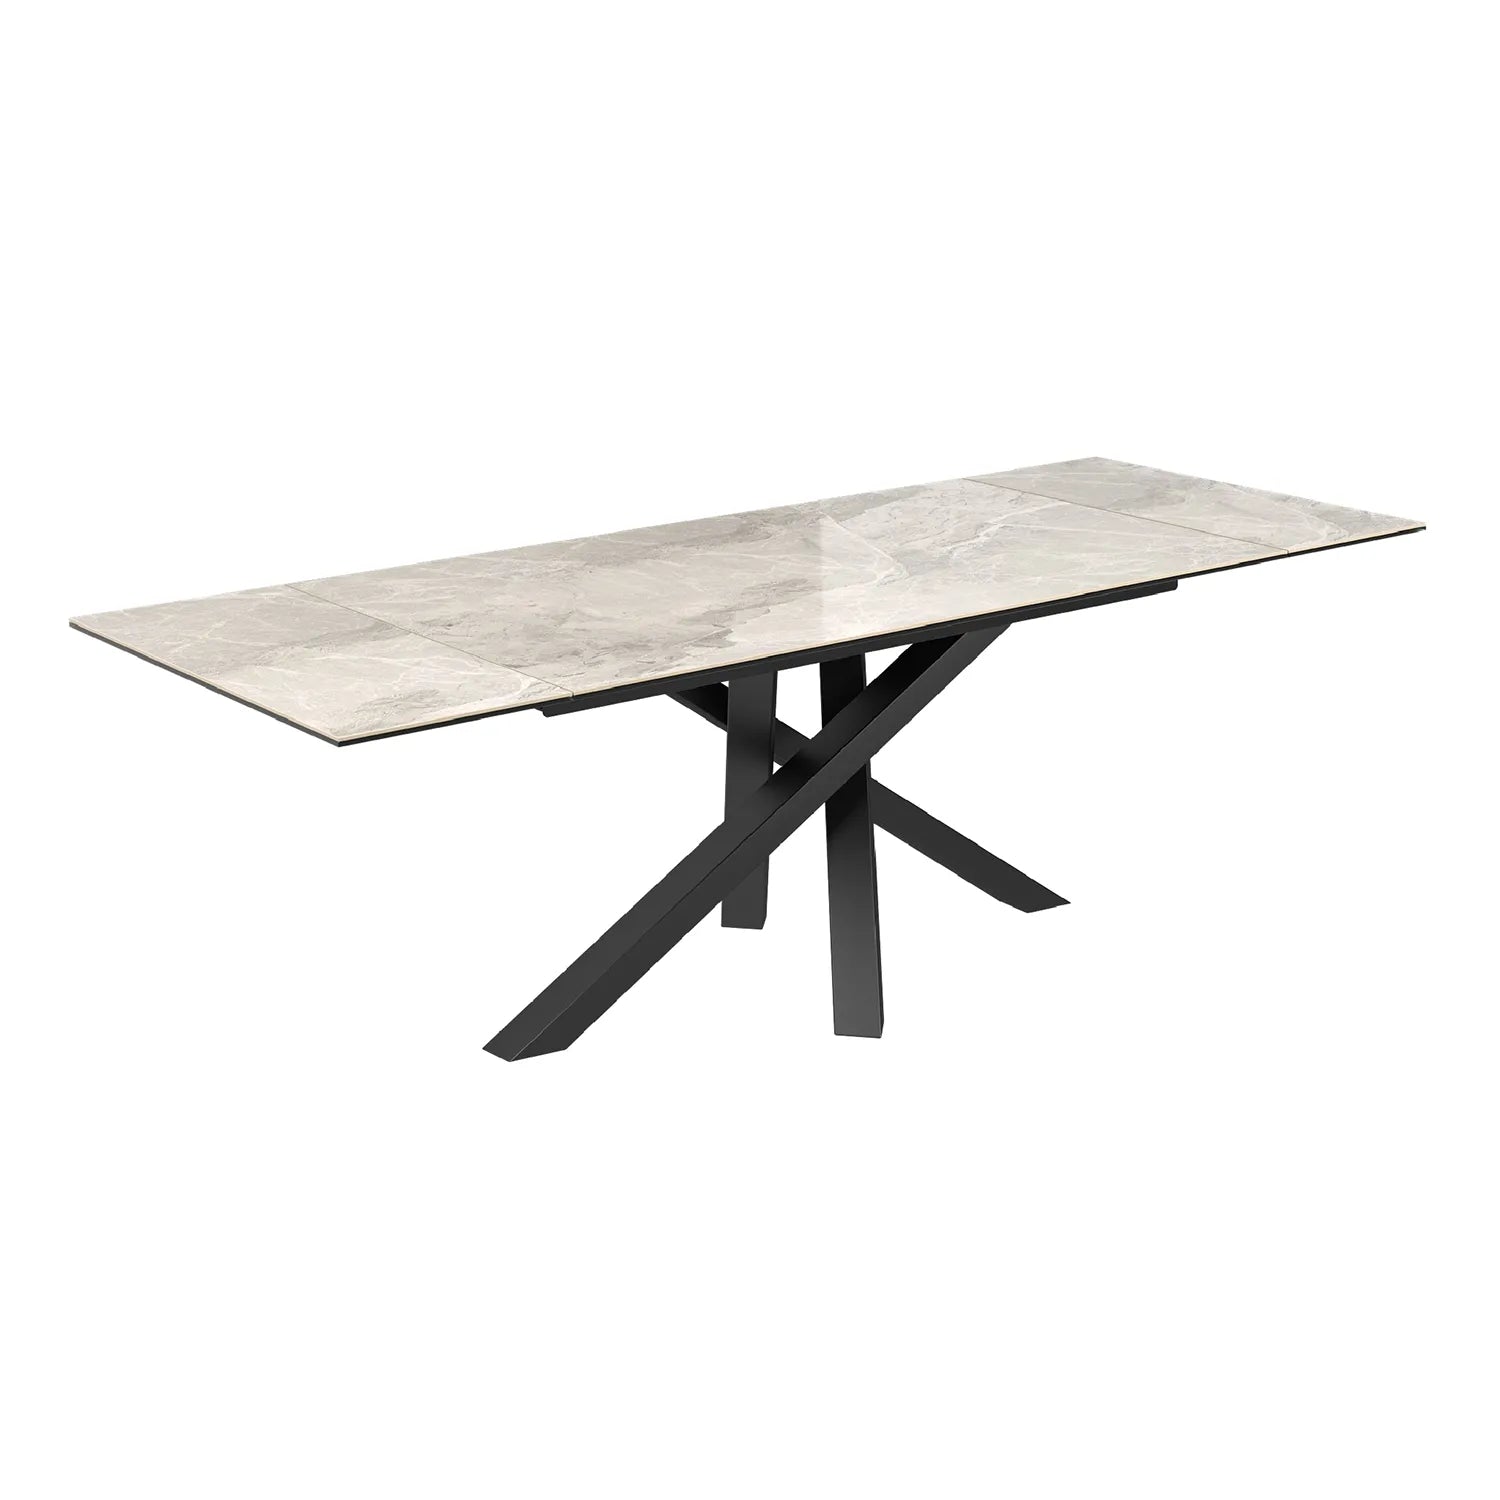 Samurai Light Grey Extending Ceramic Dining Table And 4 Chairs